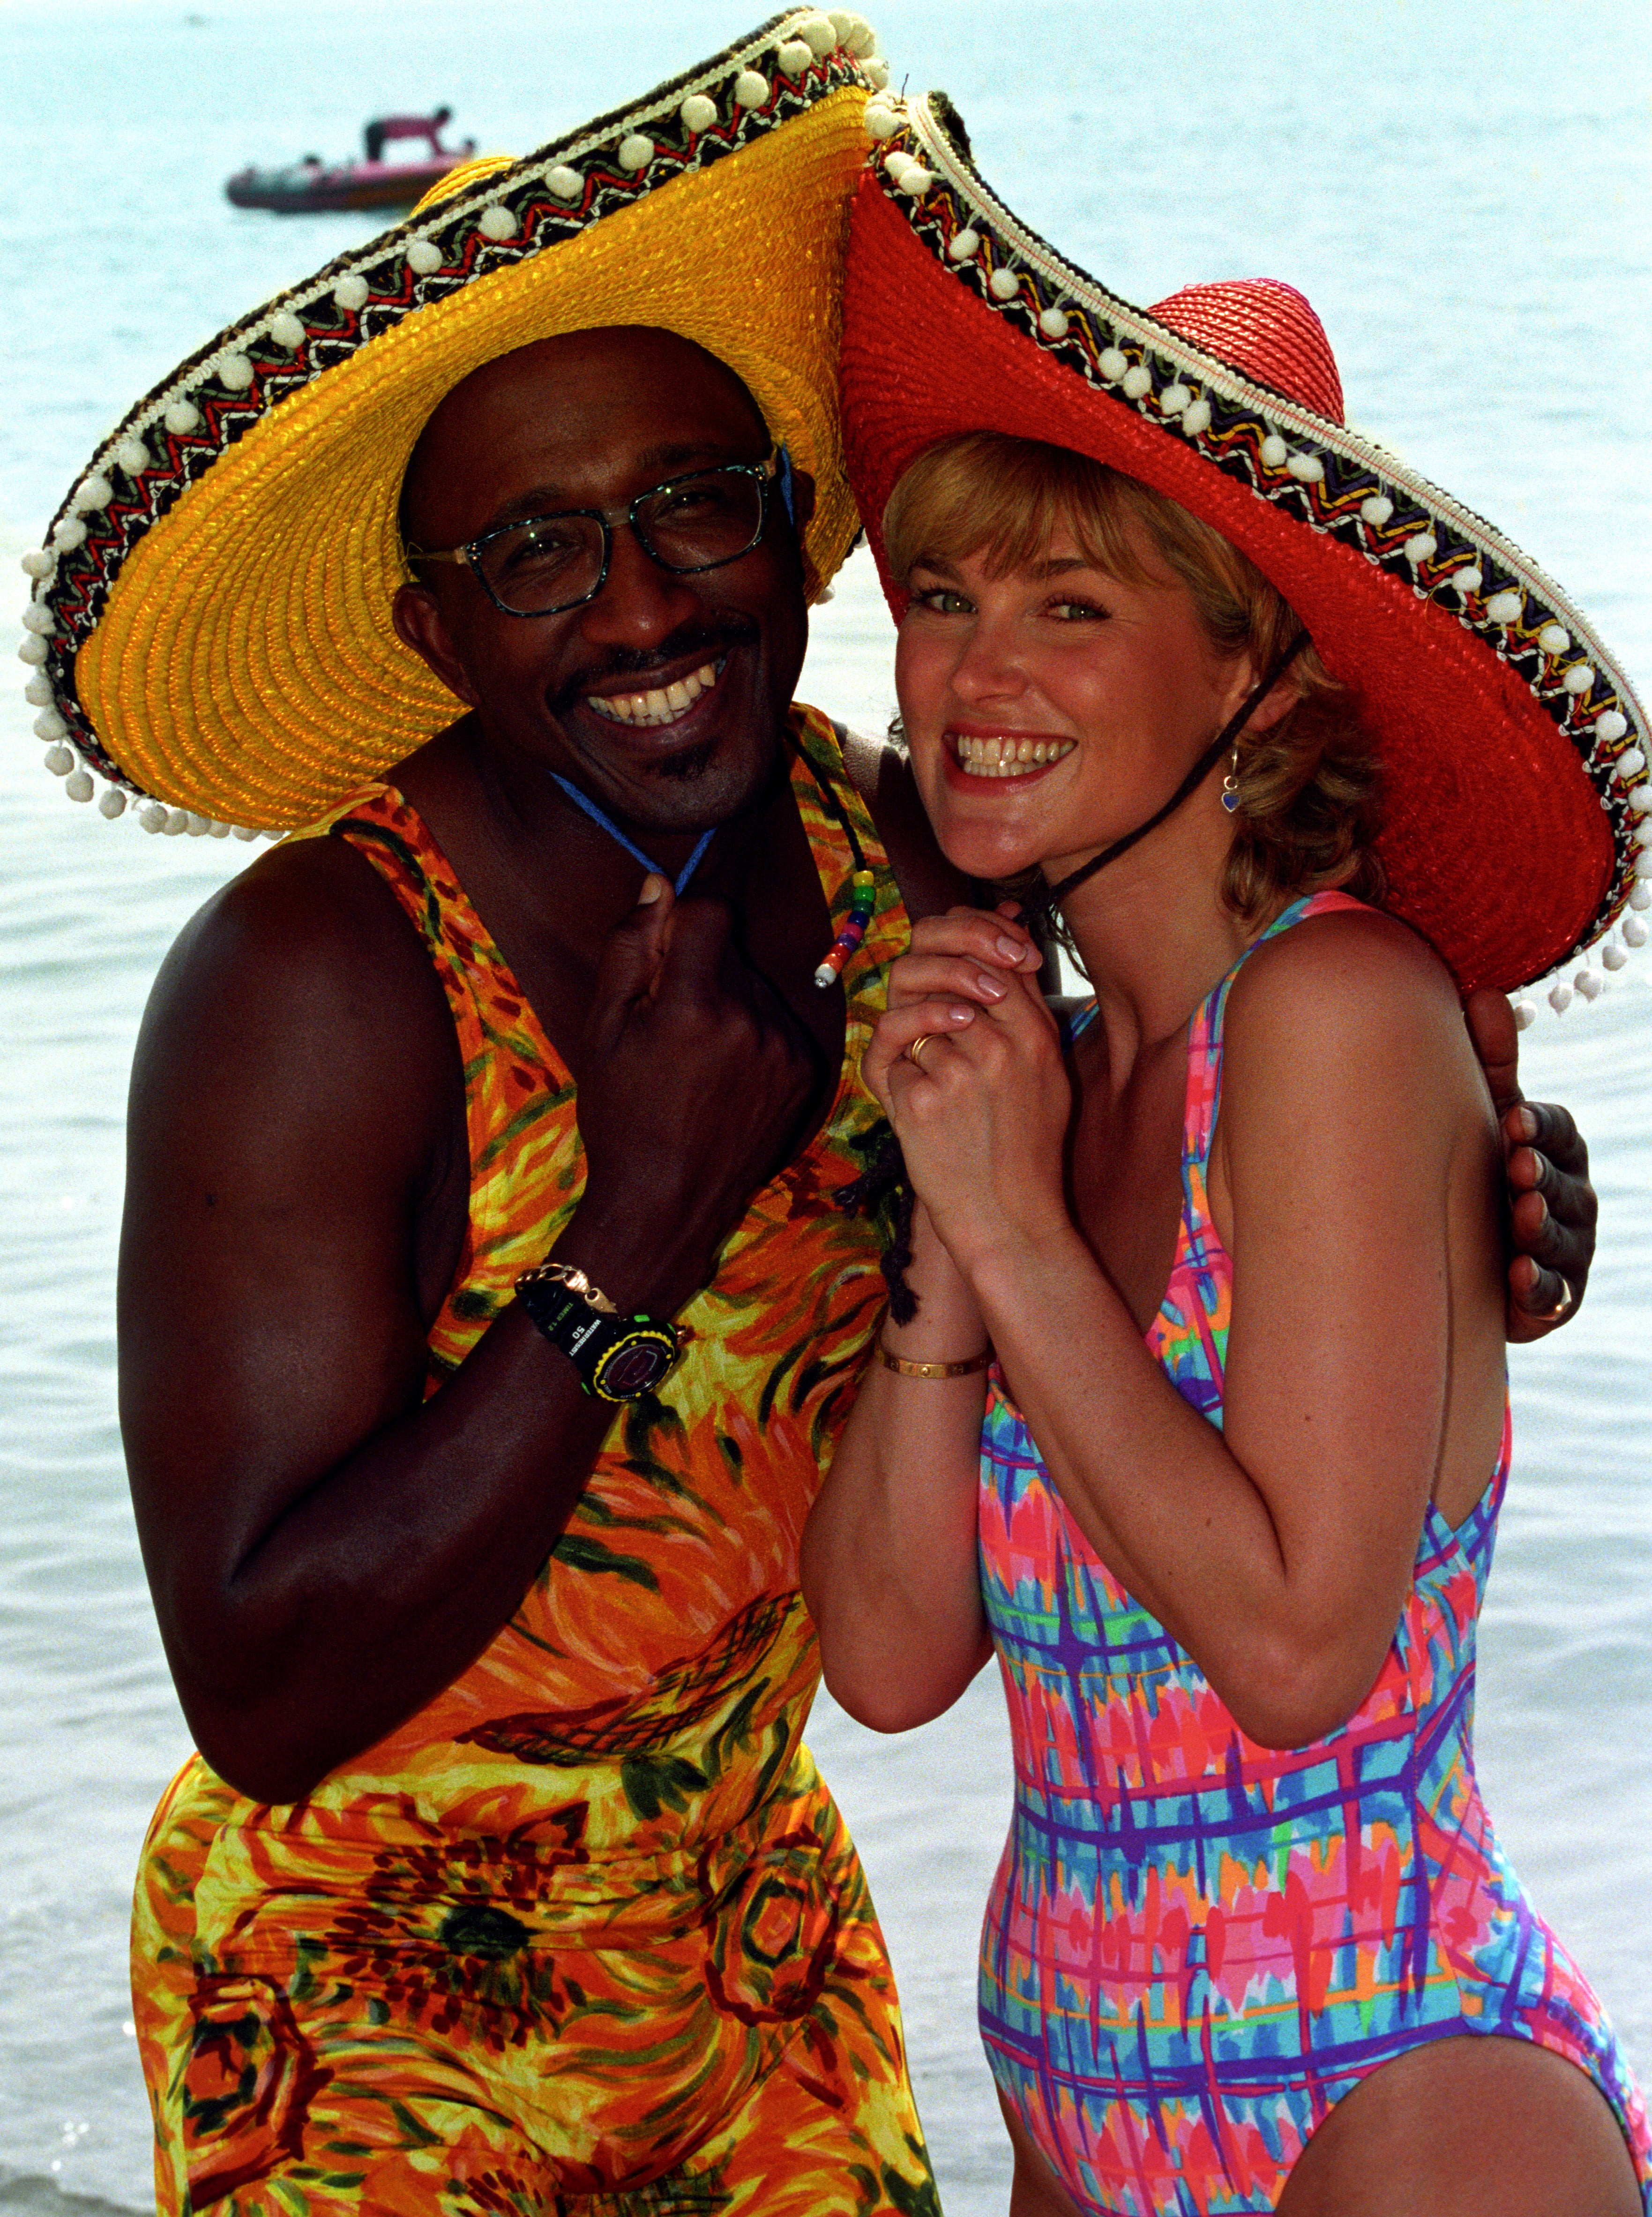 GMTV's Mr Motivator and Anthea Turner getting into the holiday spirit on the beach at Torremolinos in 1994